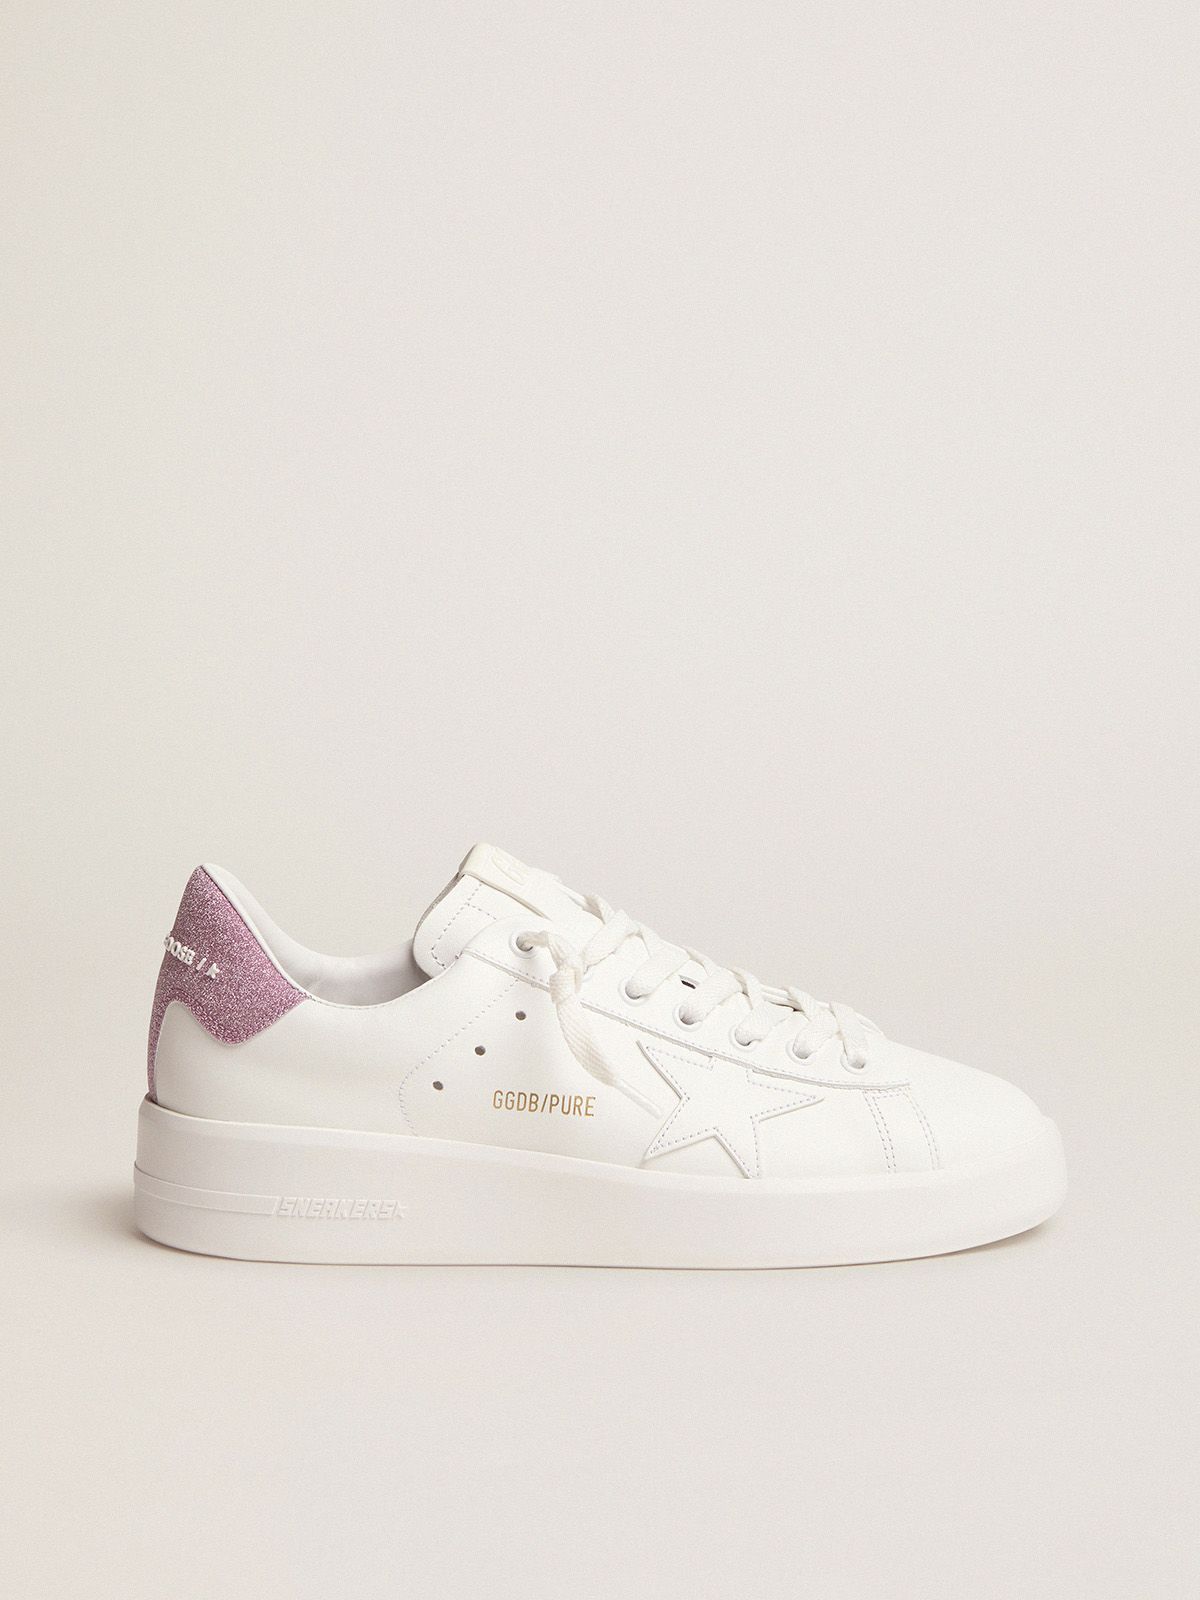 golden goose glitter with pink white in leather heel Purestar sneakers tab